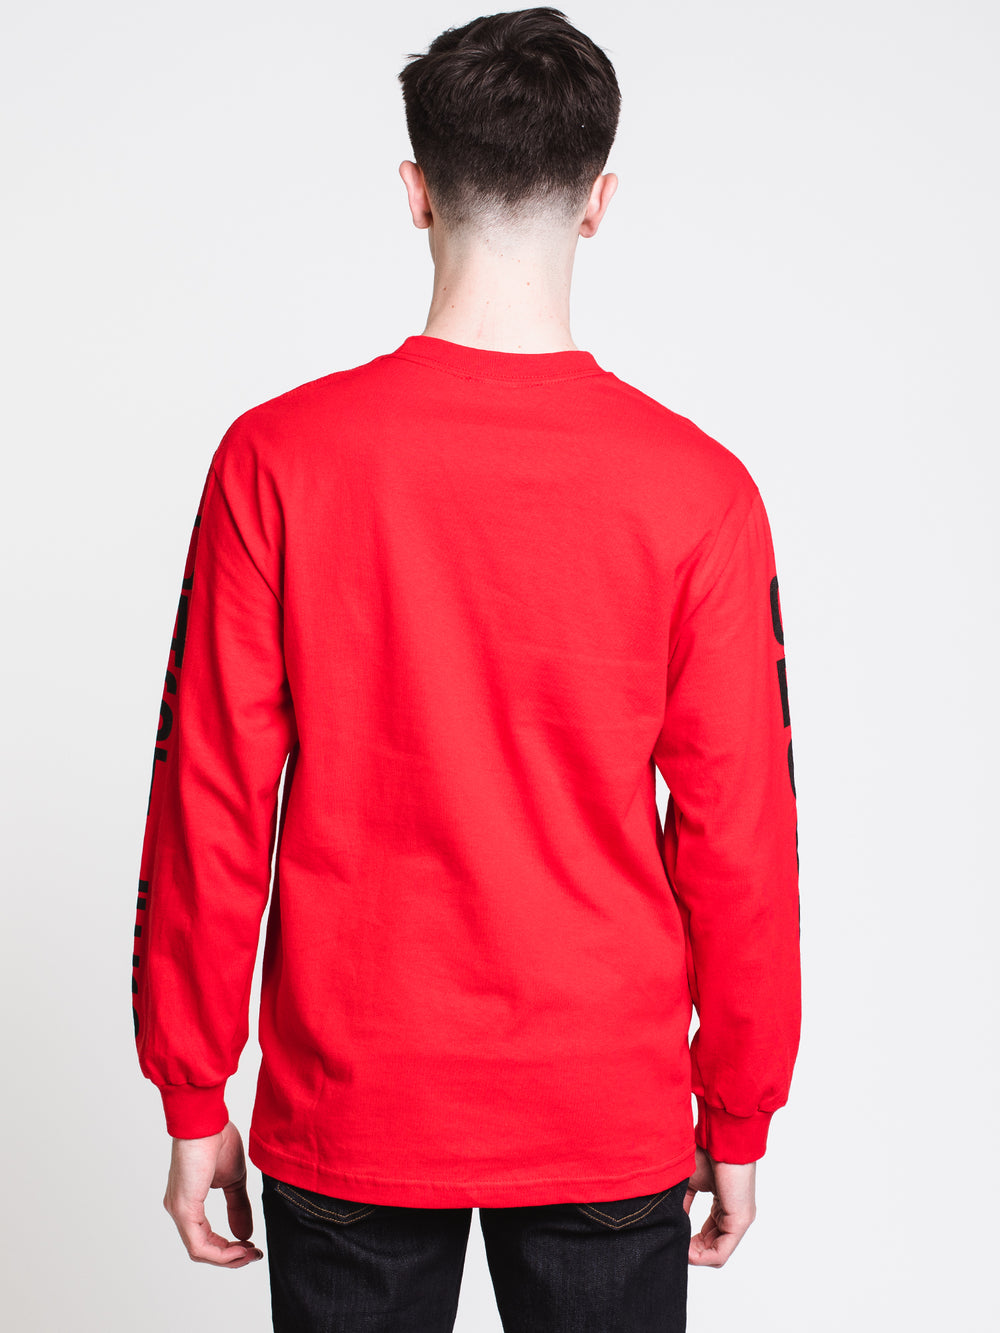 MENS C-LINK LONG SLEEVE T-SHIRT - RED - CLEARANCE